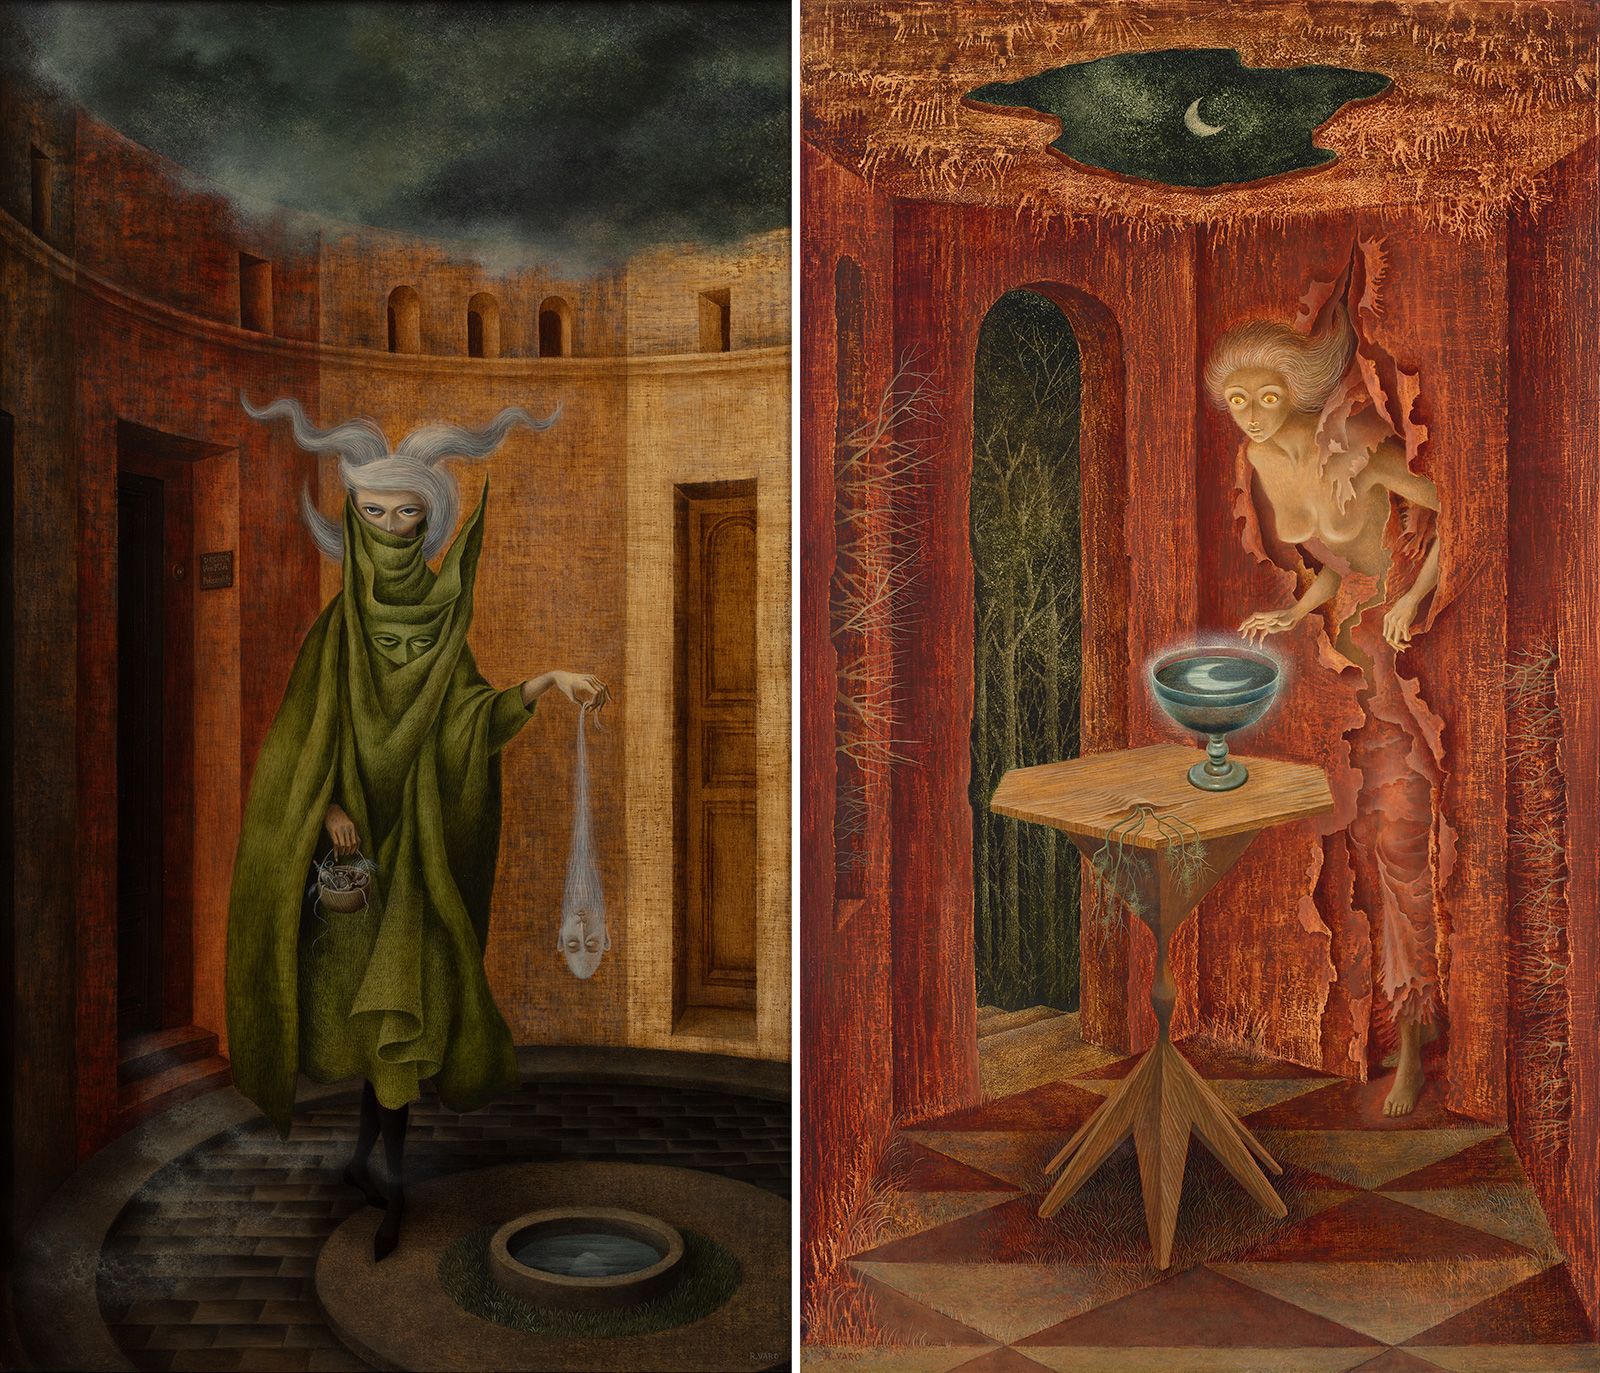 Why Remedios Varo, one of the 'three witches' of surrealism, continues to  fascinate today